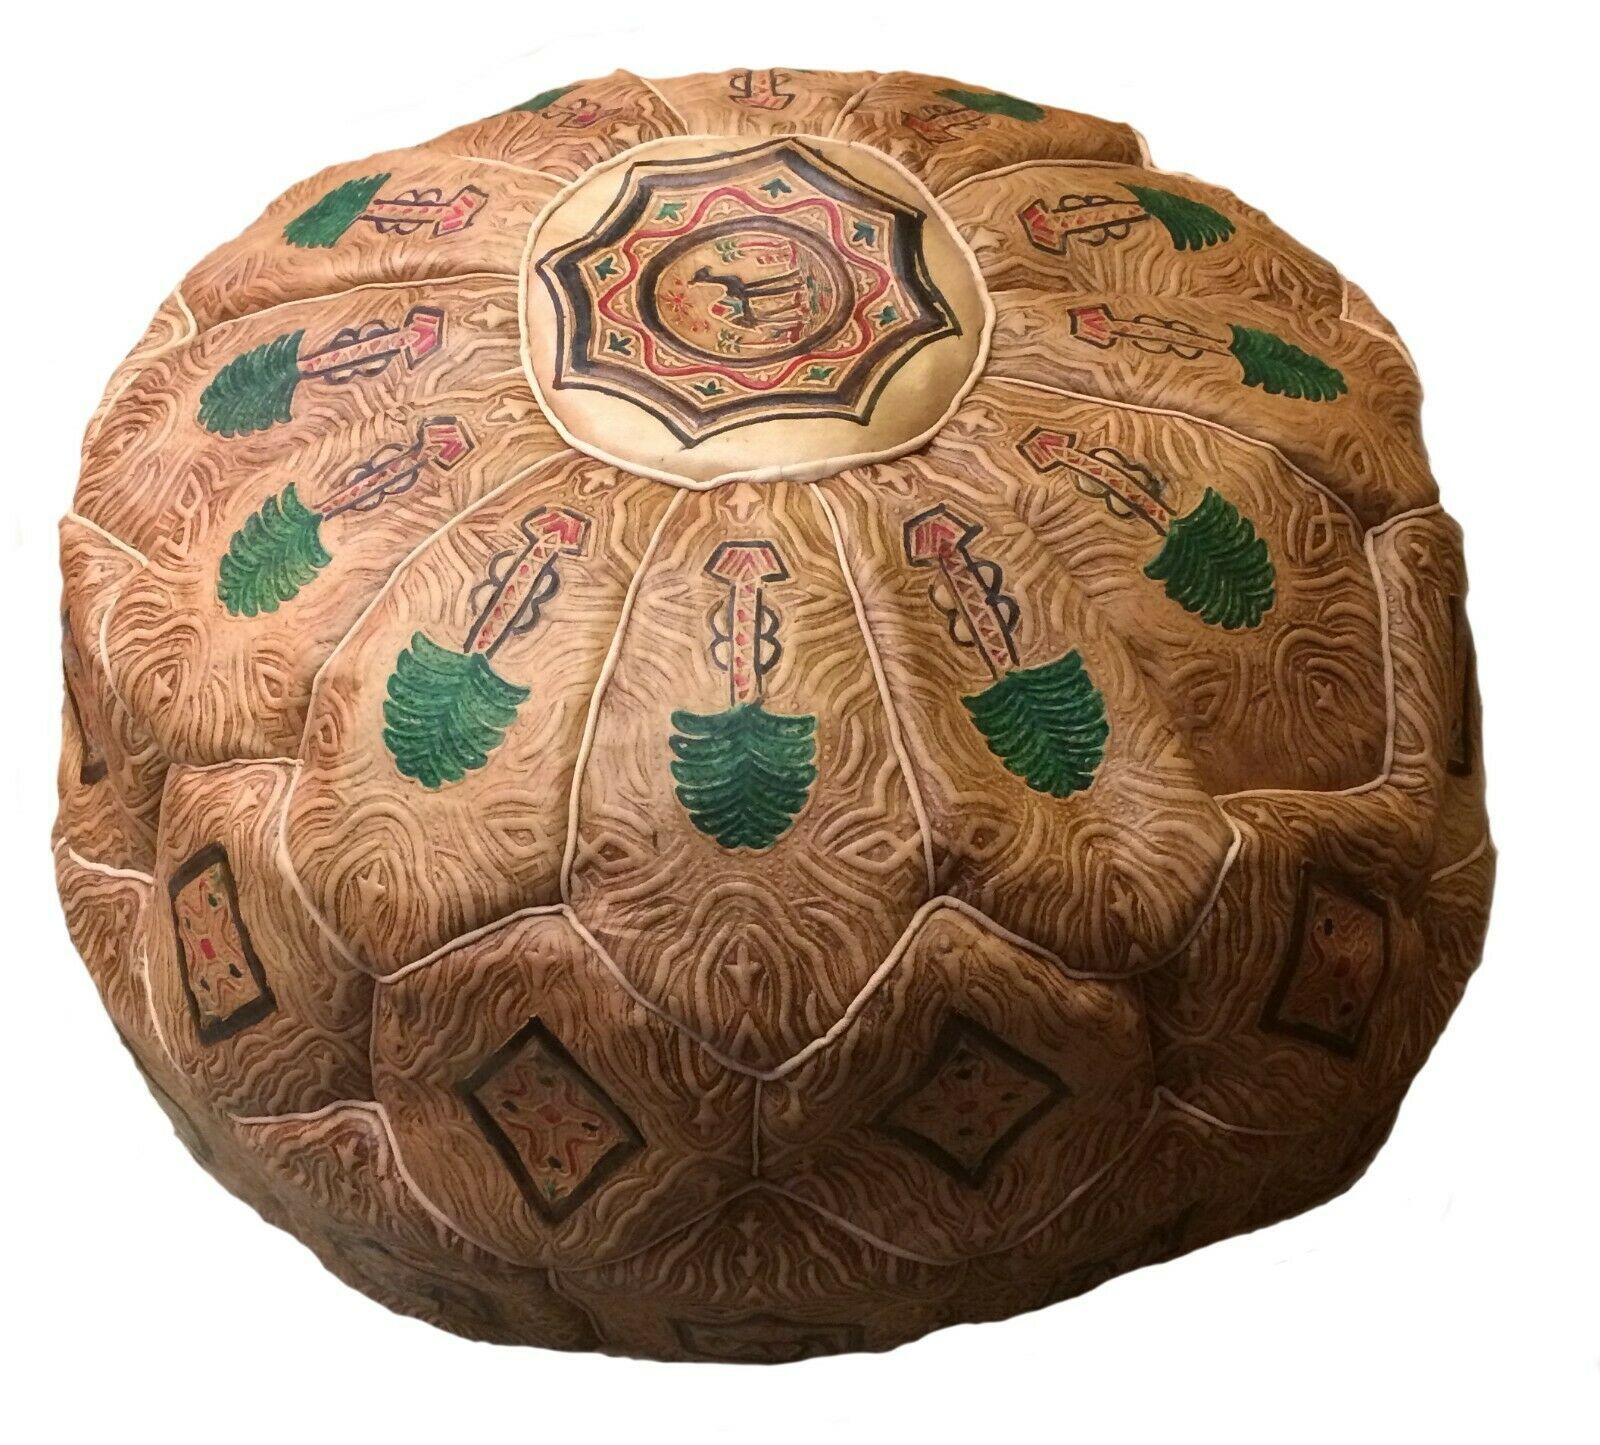 Primary image for Moroccan leather pouf tan, large Moroccan tan pouf, Moroccan large pouf tan 